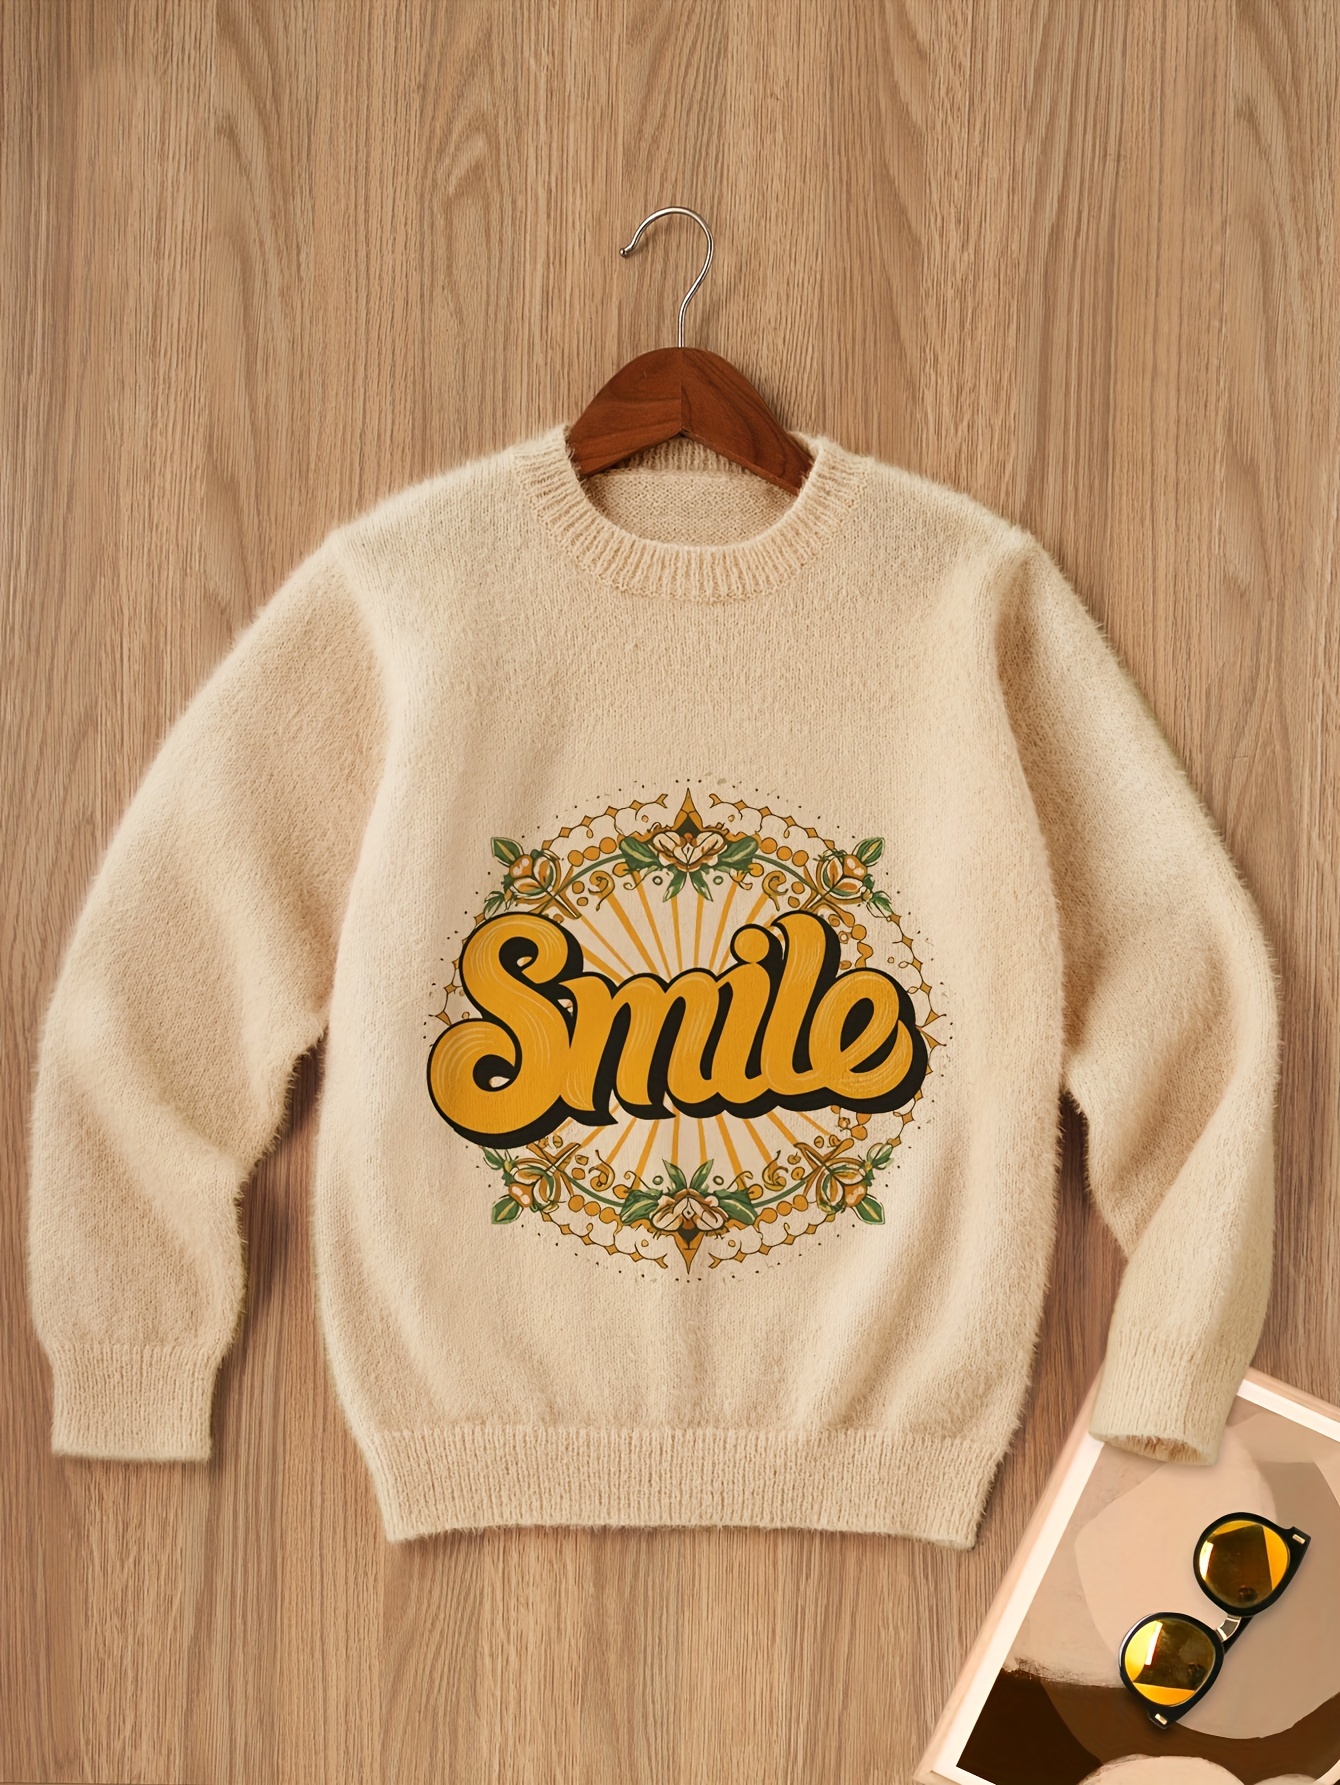 boys girls trendy knitwear smile graphic solid crew neck knit sweater cute style soft jumper top pullover